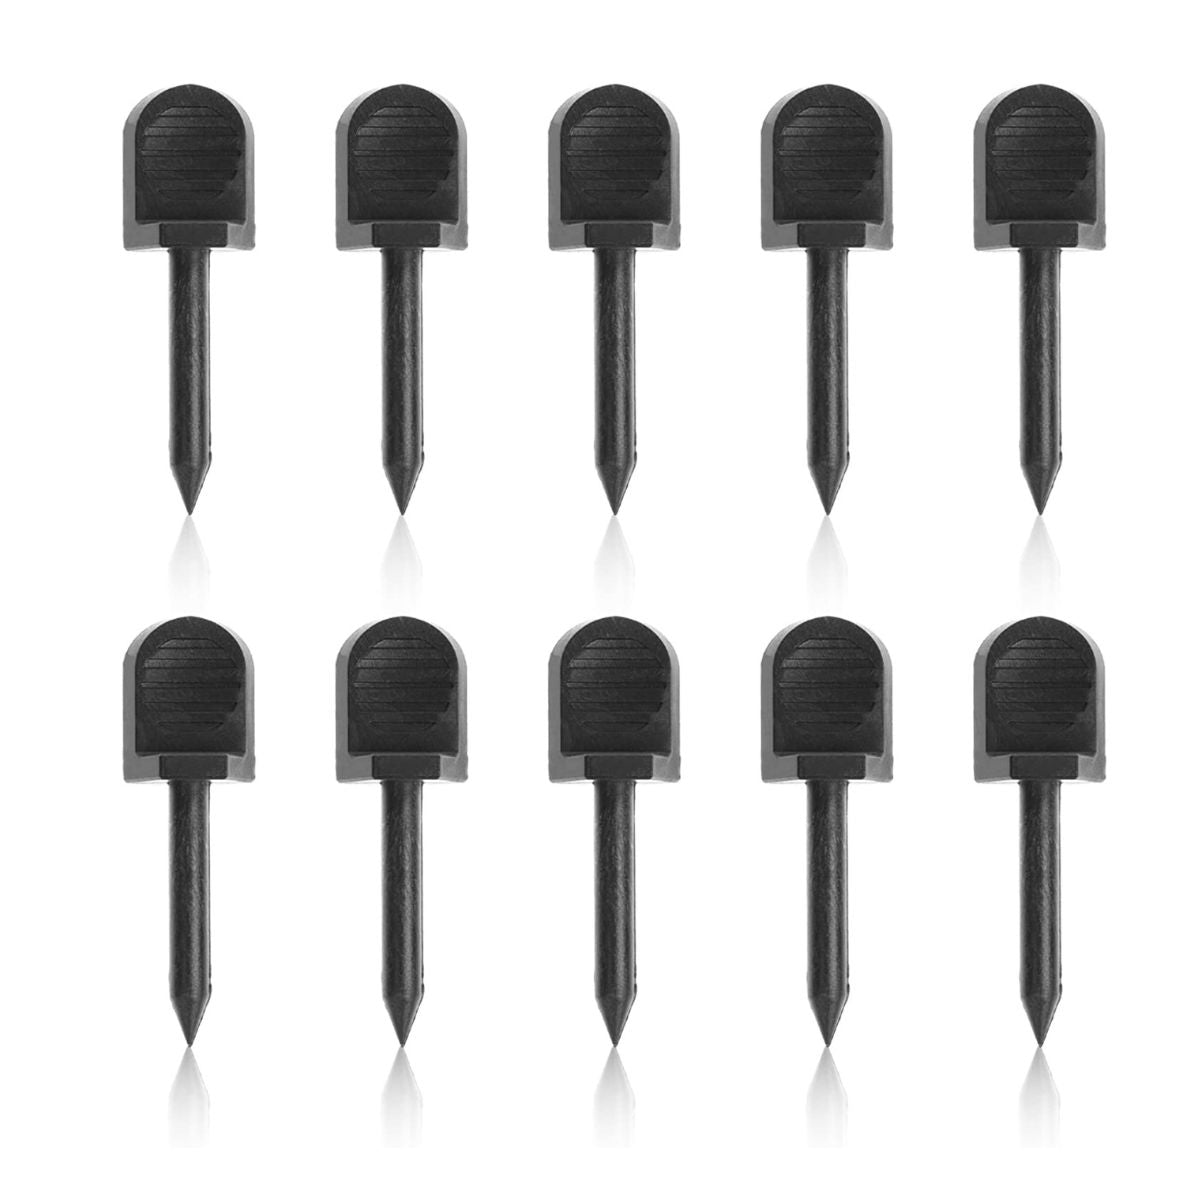 Target Face Pin - 422001 Set of 10 - Archery Equipment 3